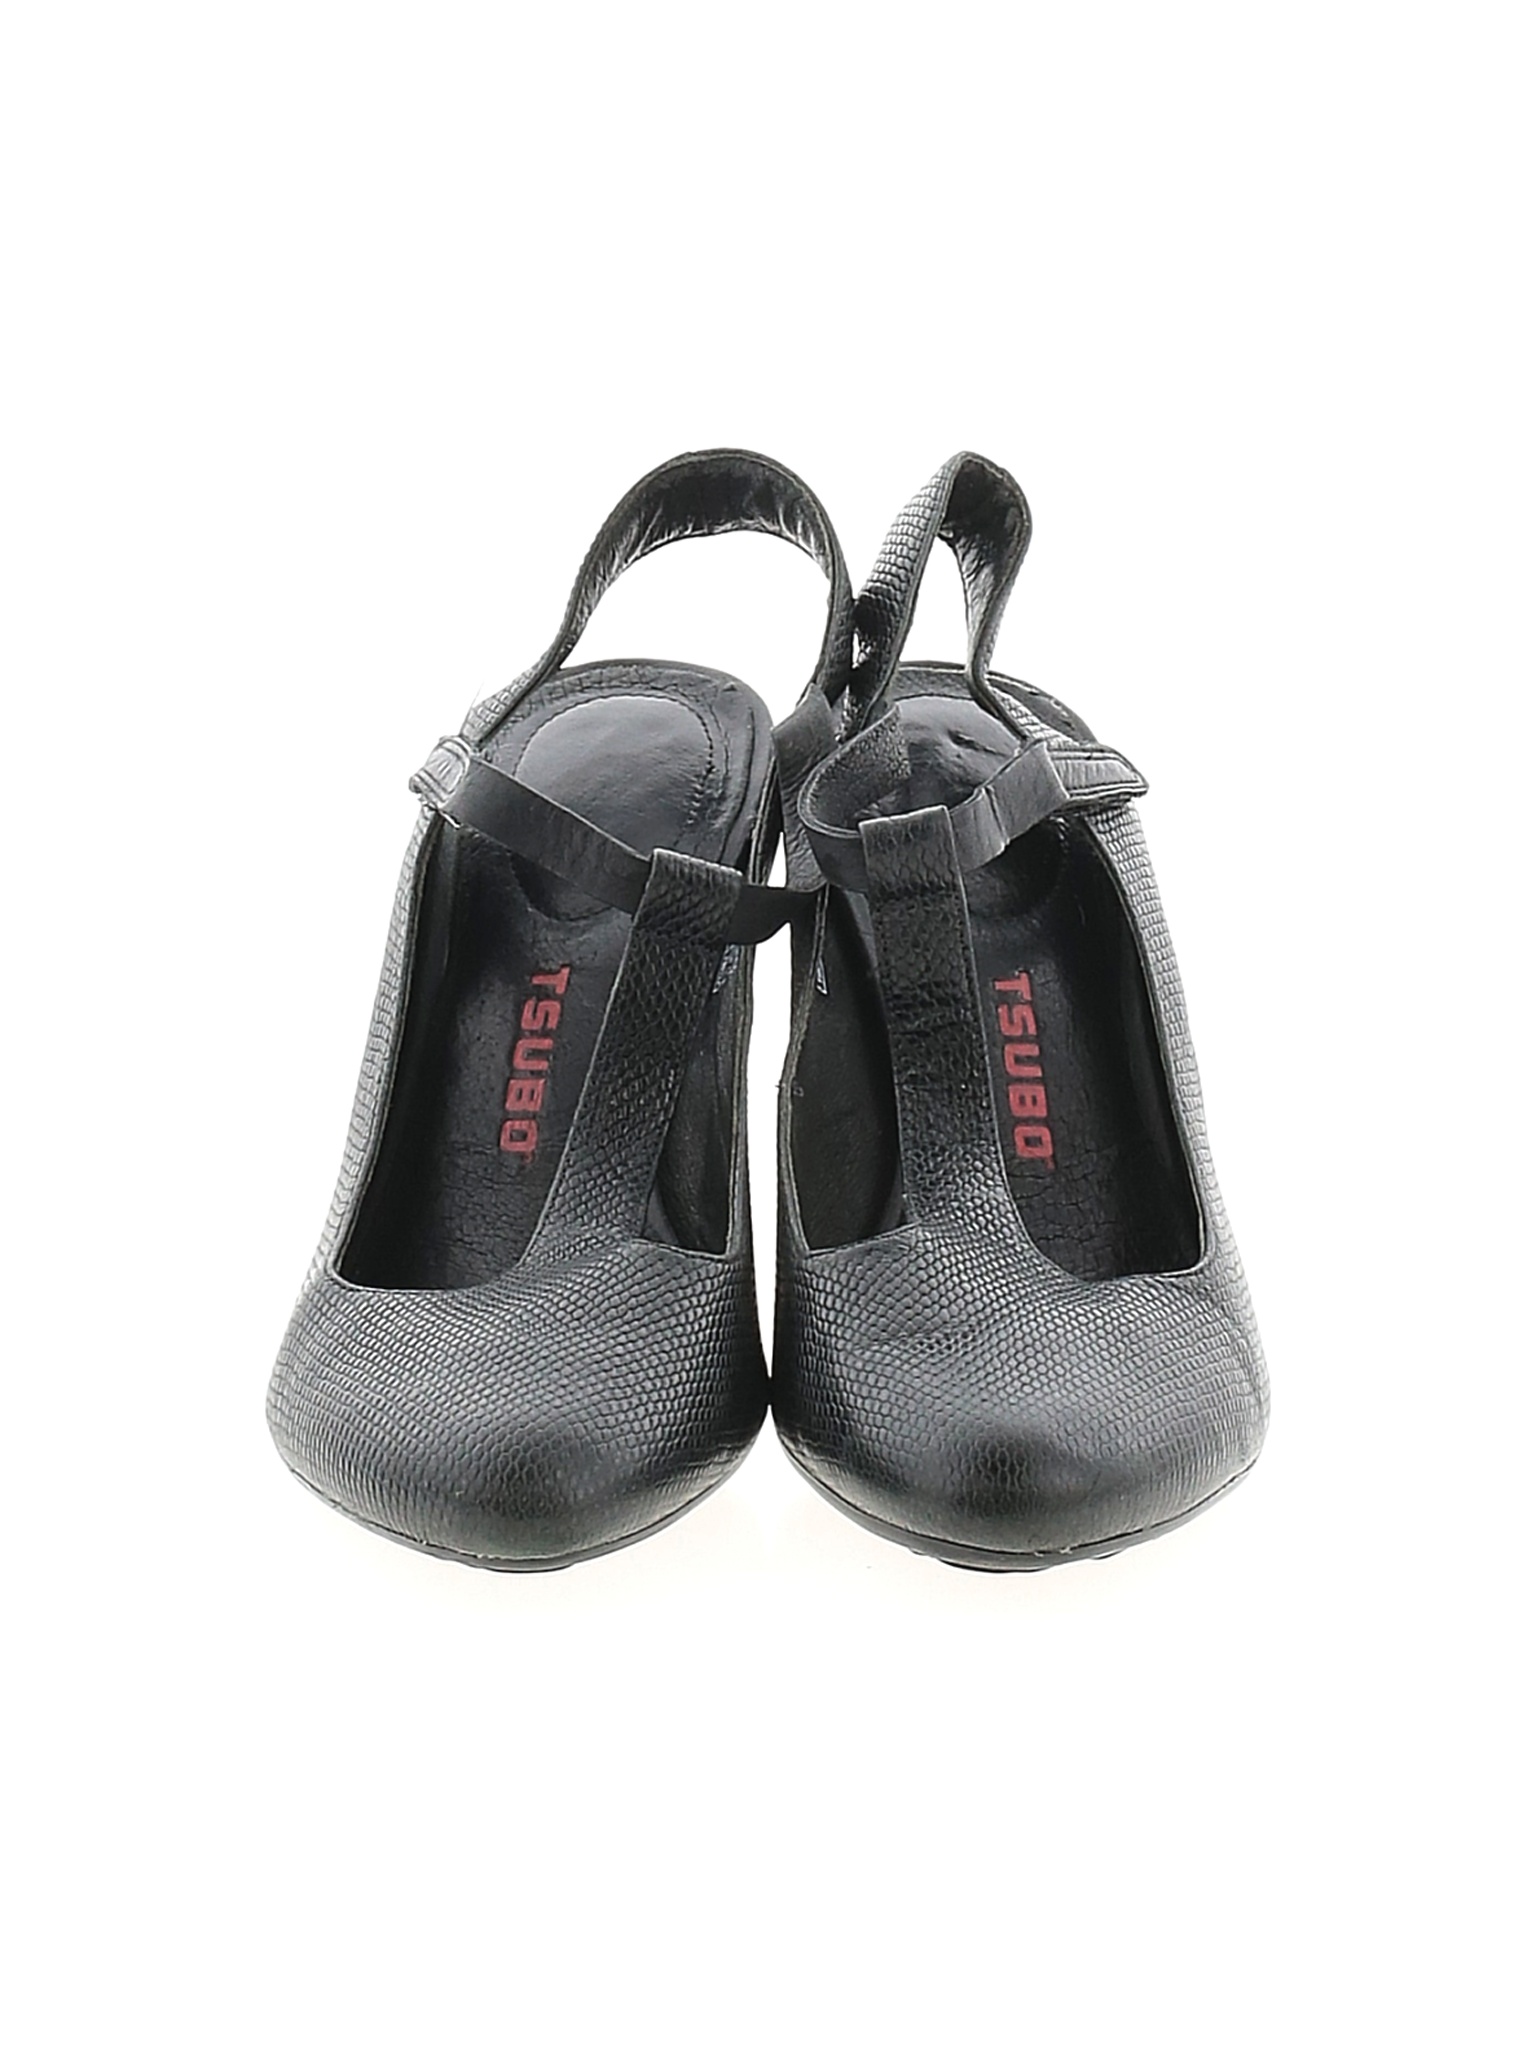 tsubo women's shoes clearance